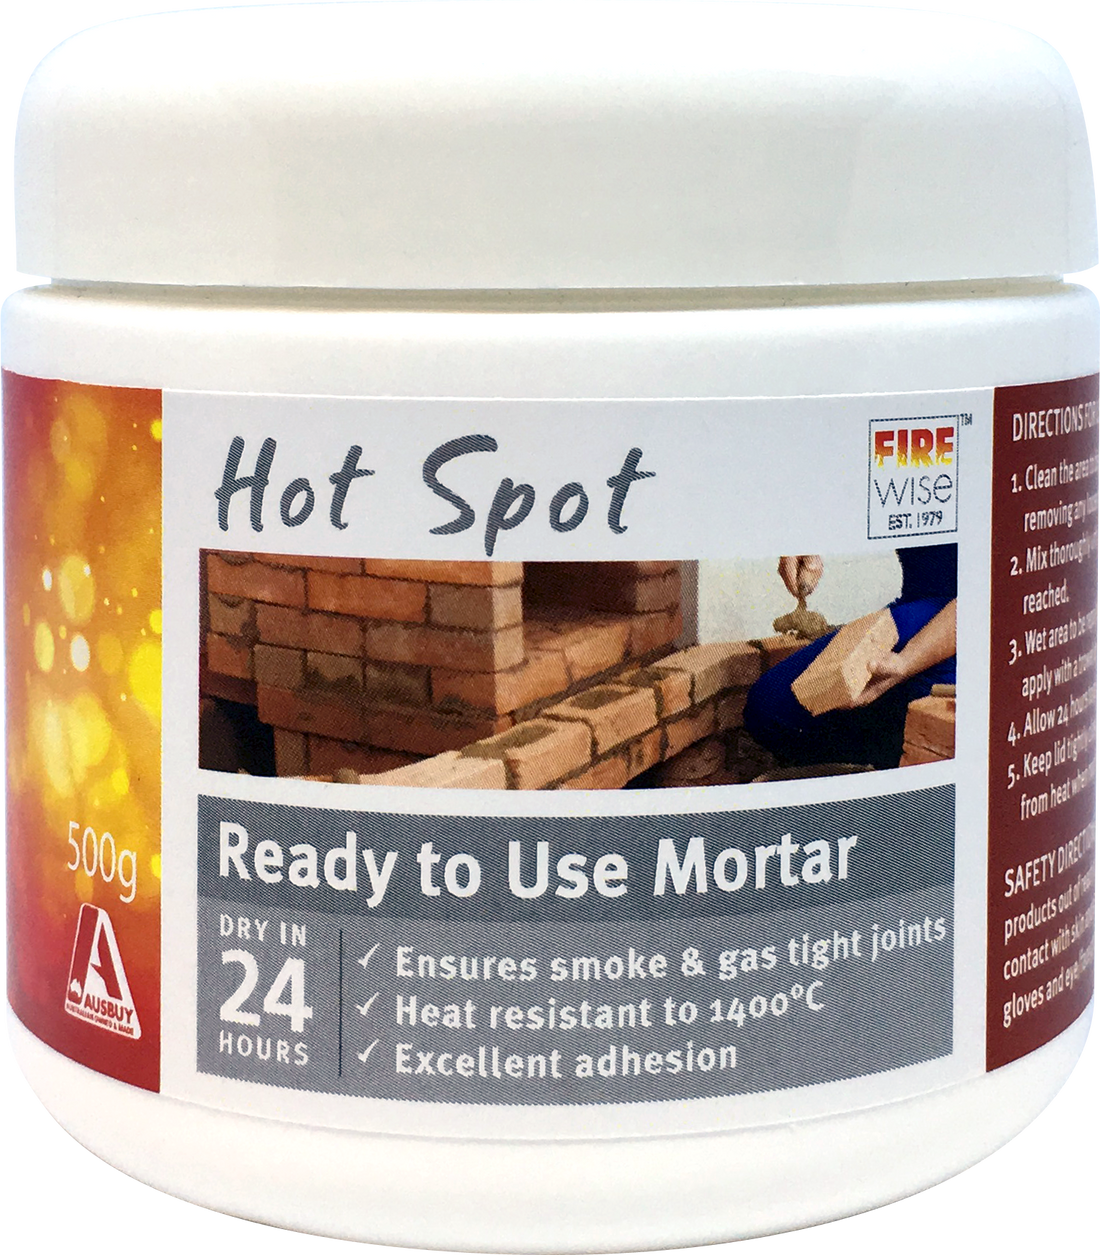 Rubbedin Firewise® Hot Spot Ready to Use Mortar 500g - Heat Resistant to 1400°C